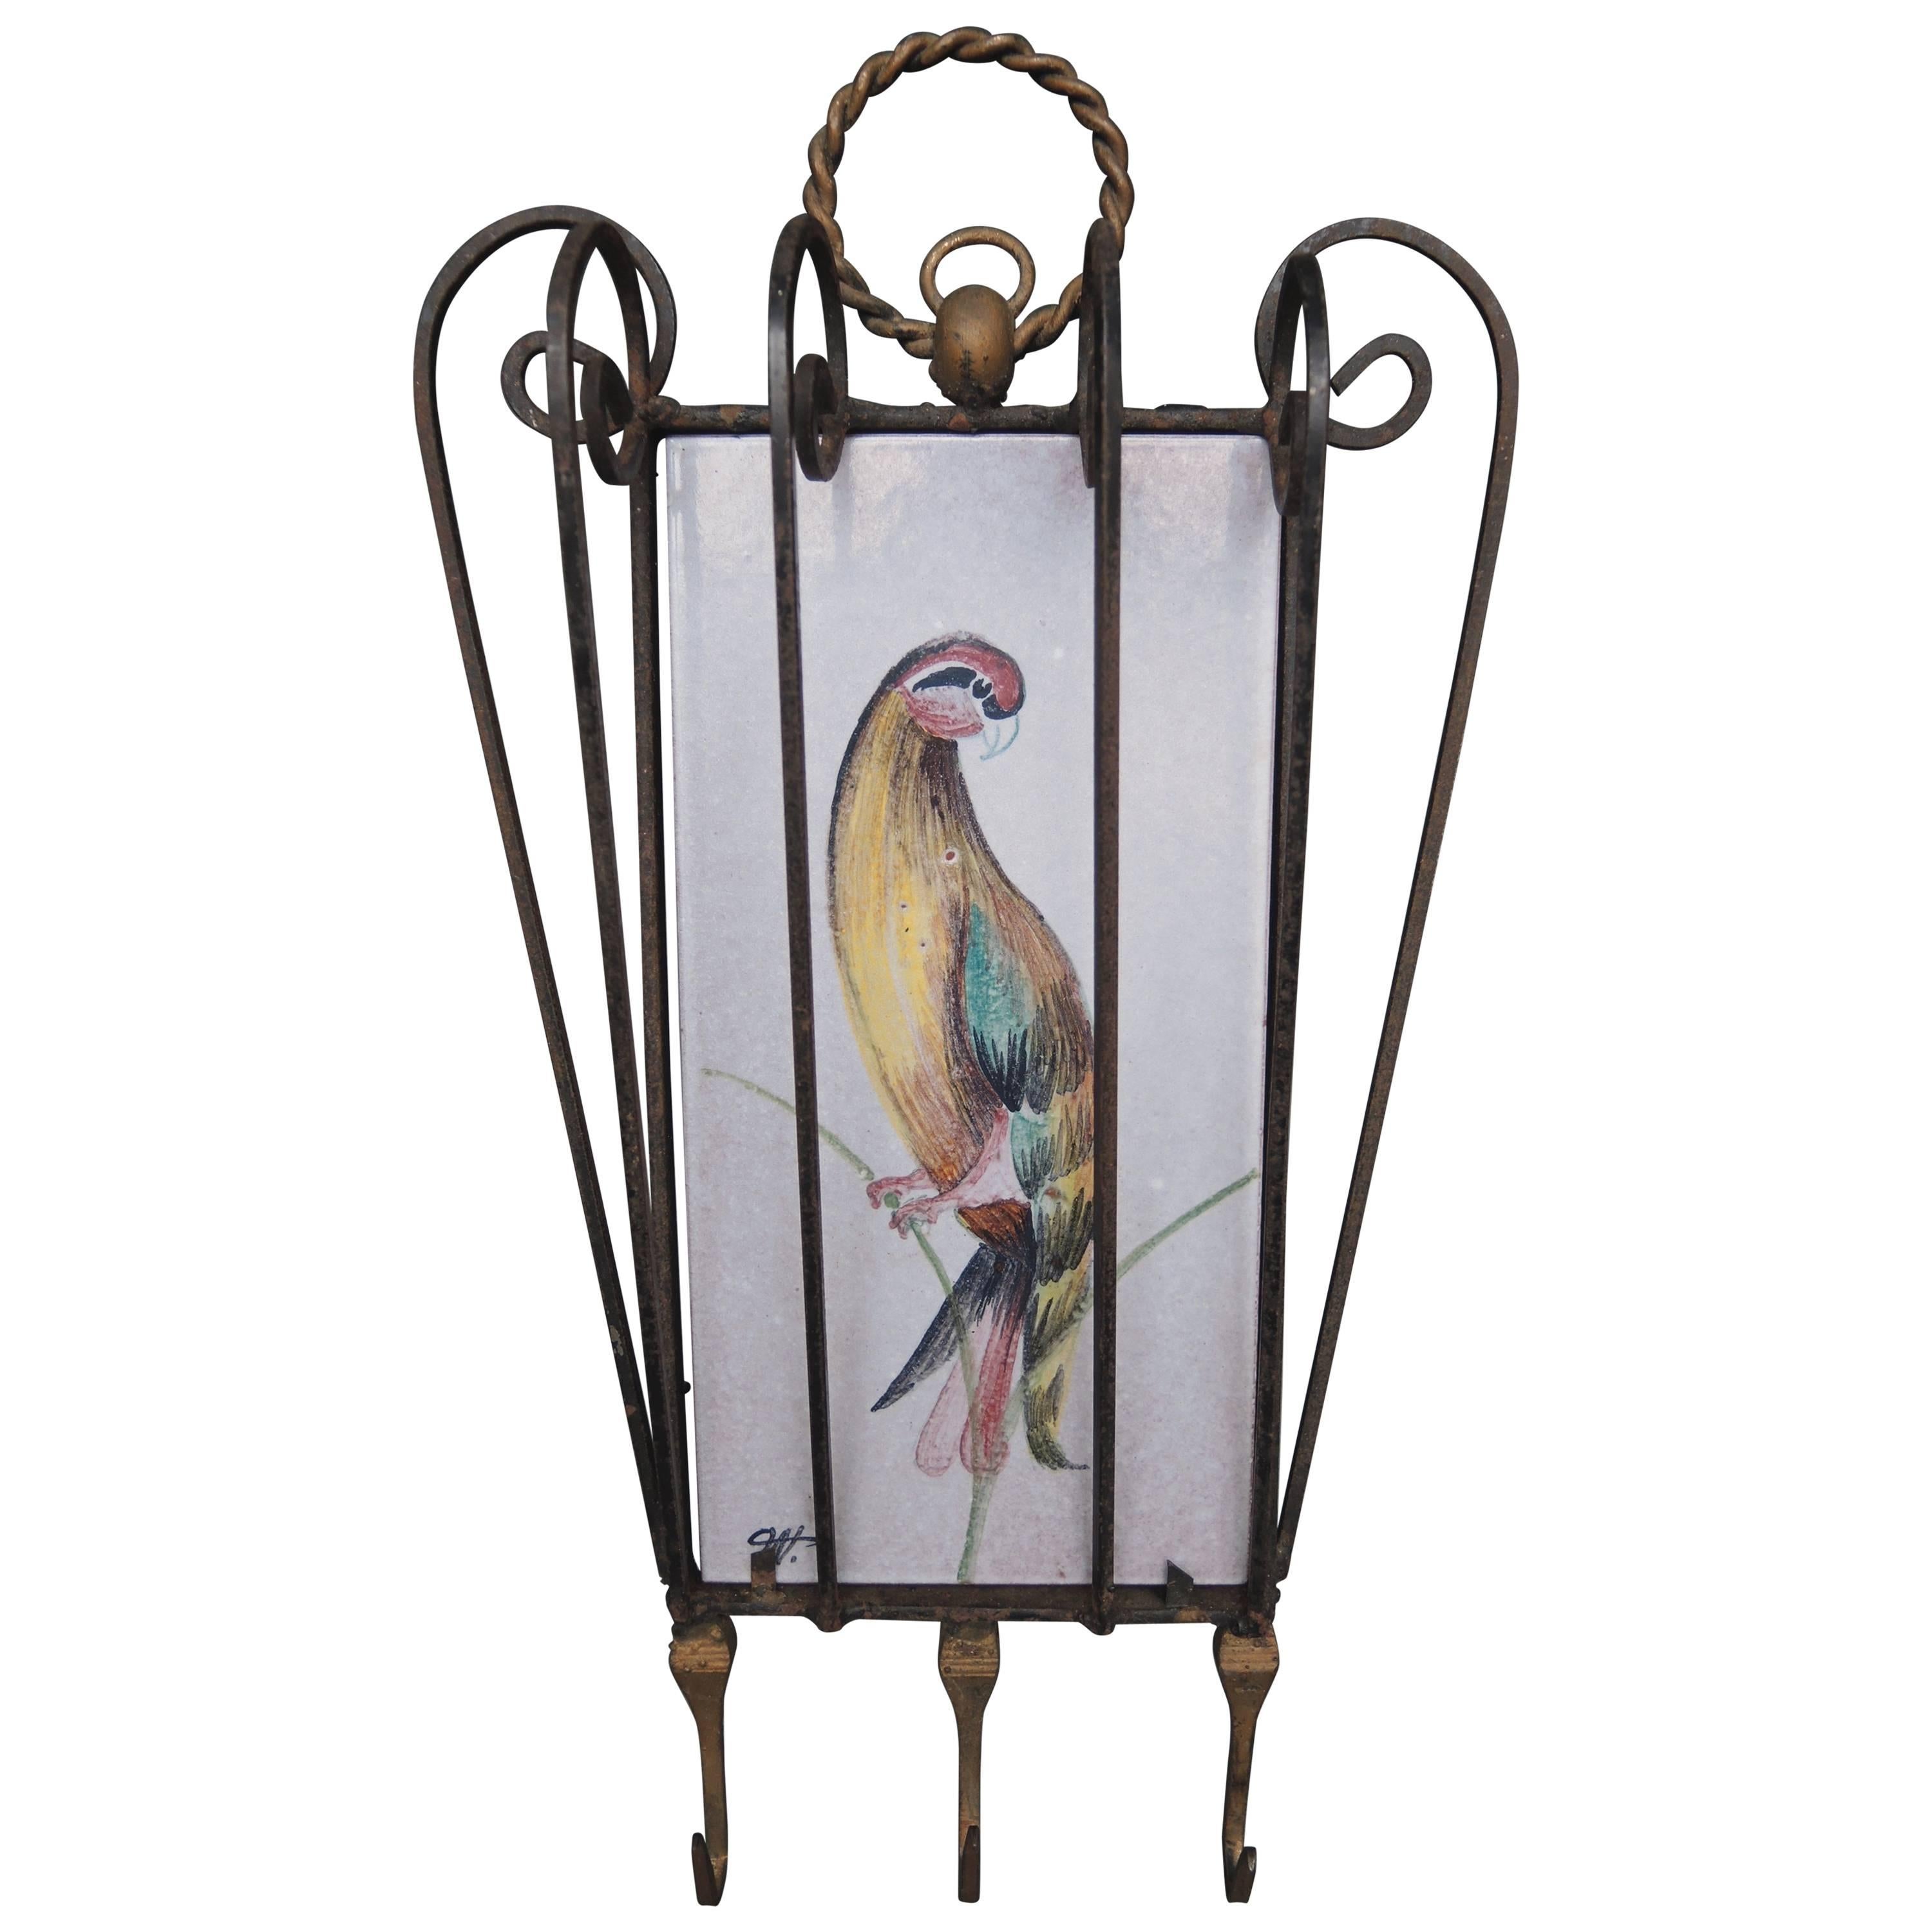 Wrought Iron Hooks Inset with Hand-Painted Belgian Tile with a Parrot For Sale